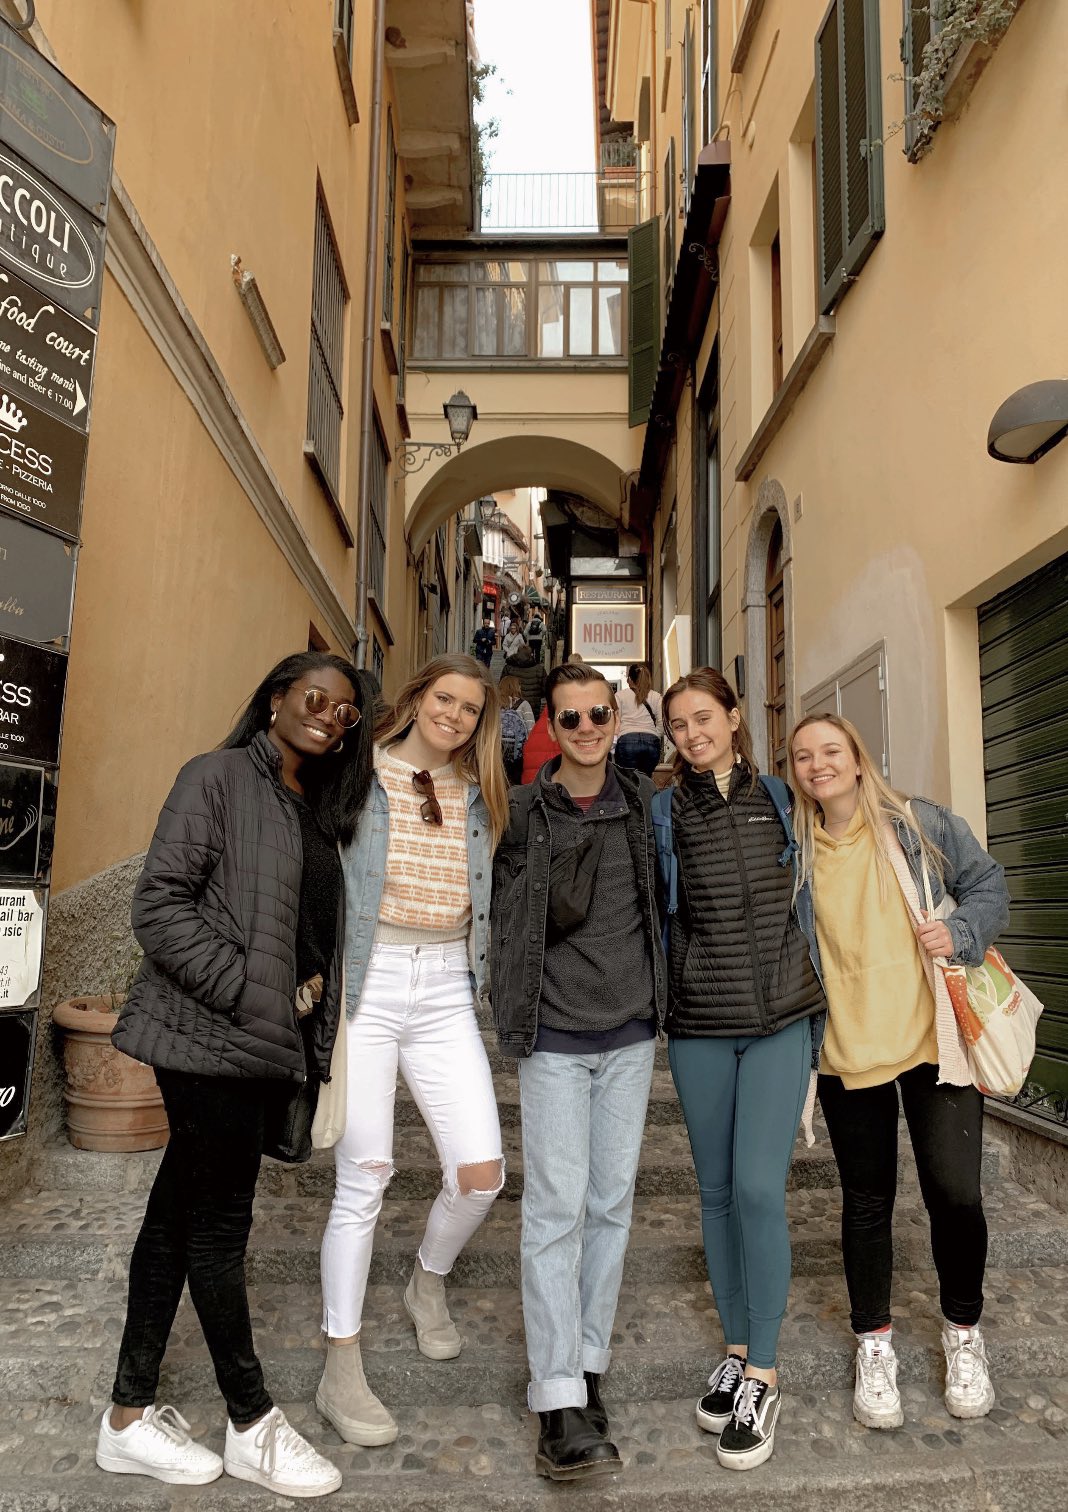 Danny with a group of friends posing in the streets of Italy.